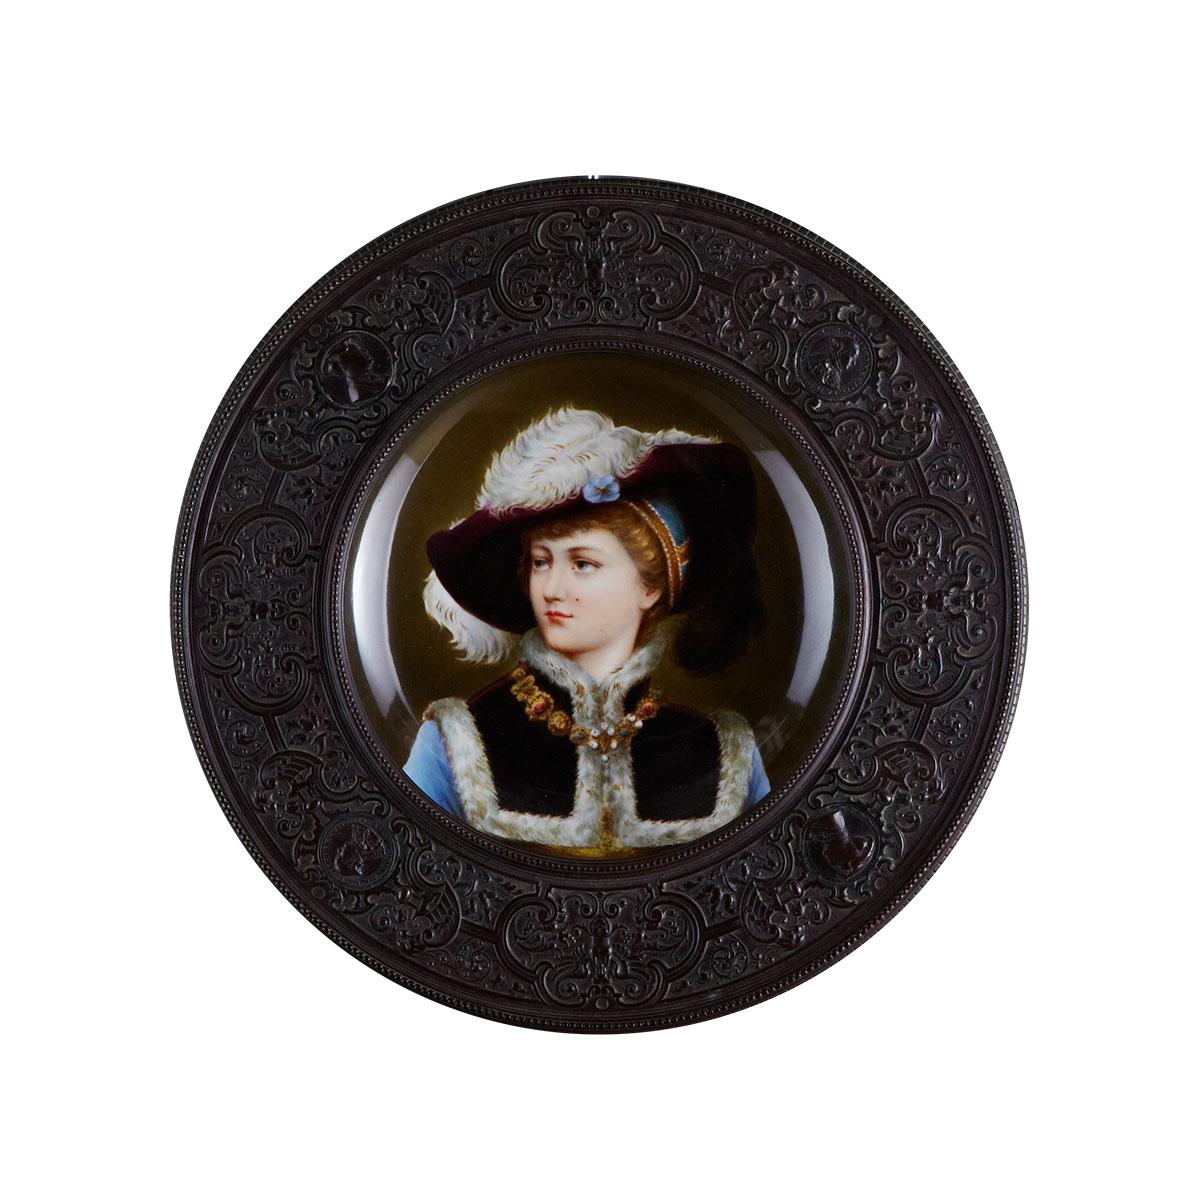 Pair of Patinated Bronze Framed German Porcelain Portrait Plates, late 19th century